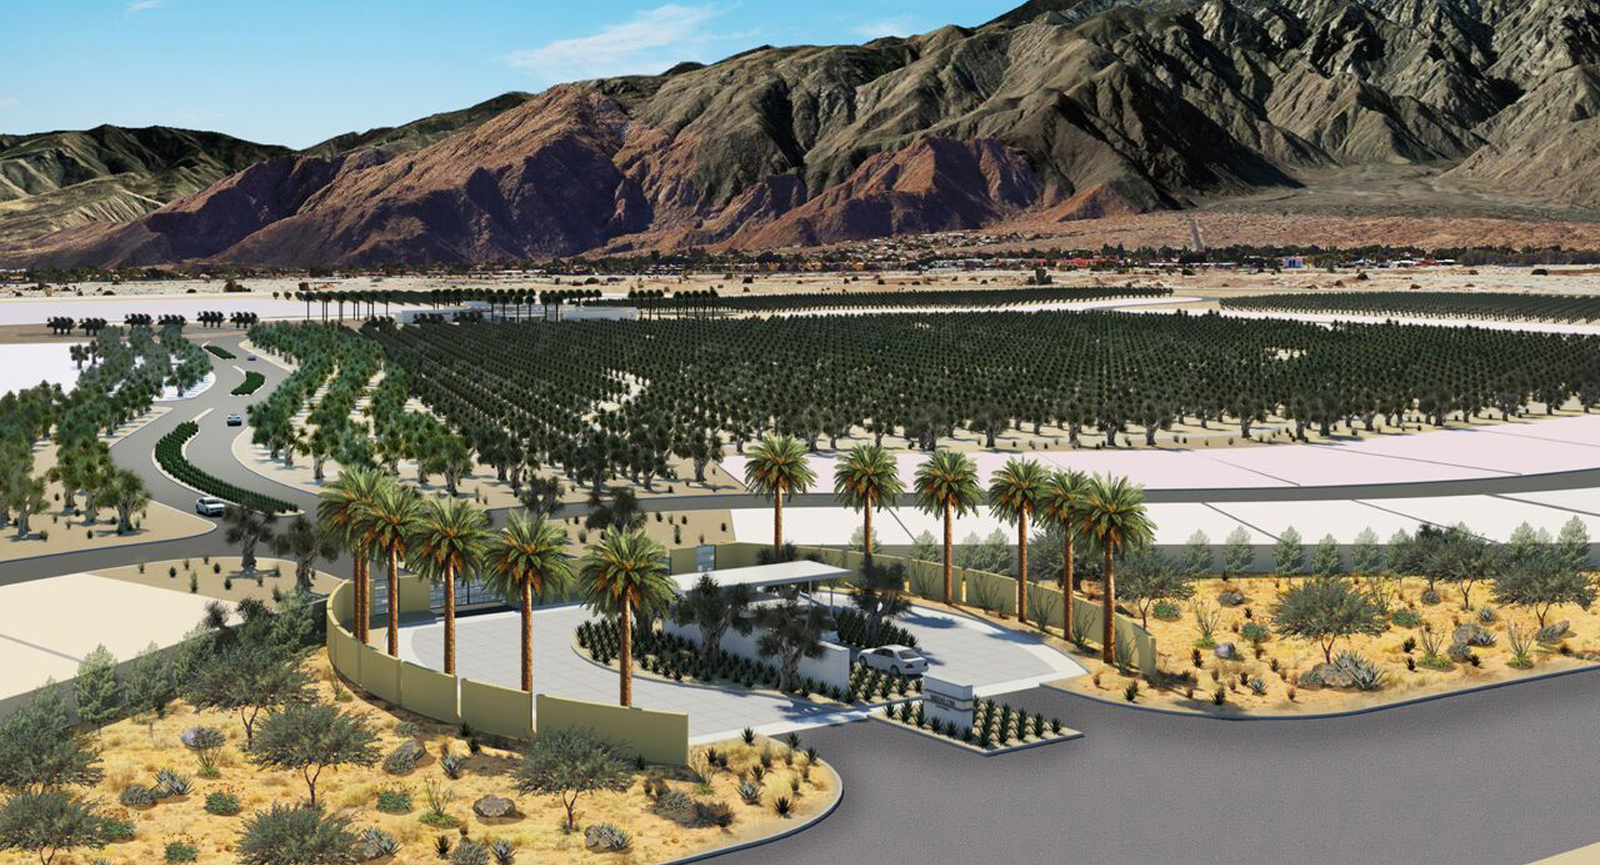 Goodbye golf course, hello olive groves! New Palm Springs enclave to become an ‘agri-hood’